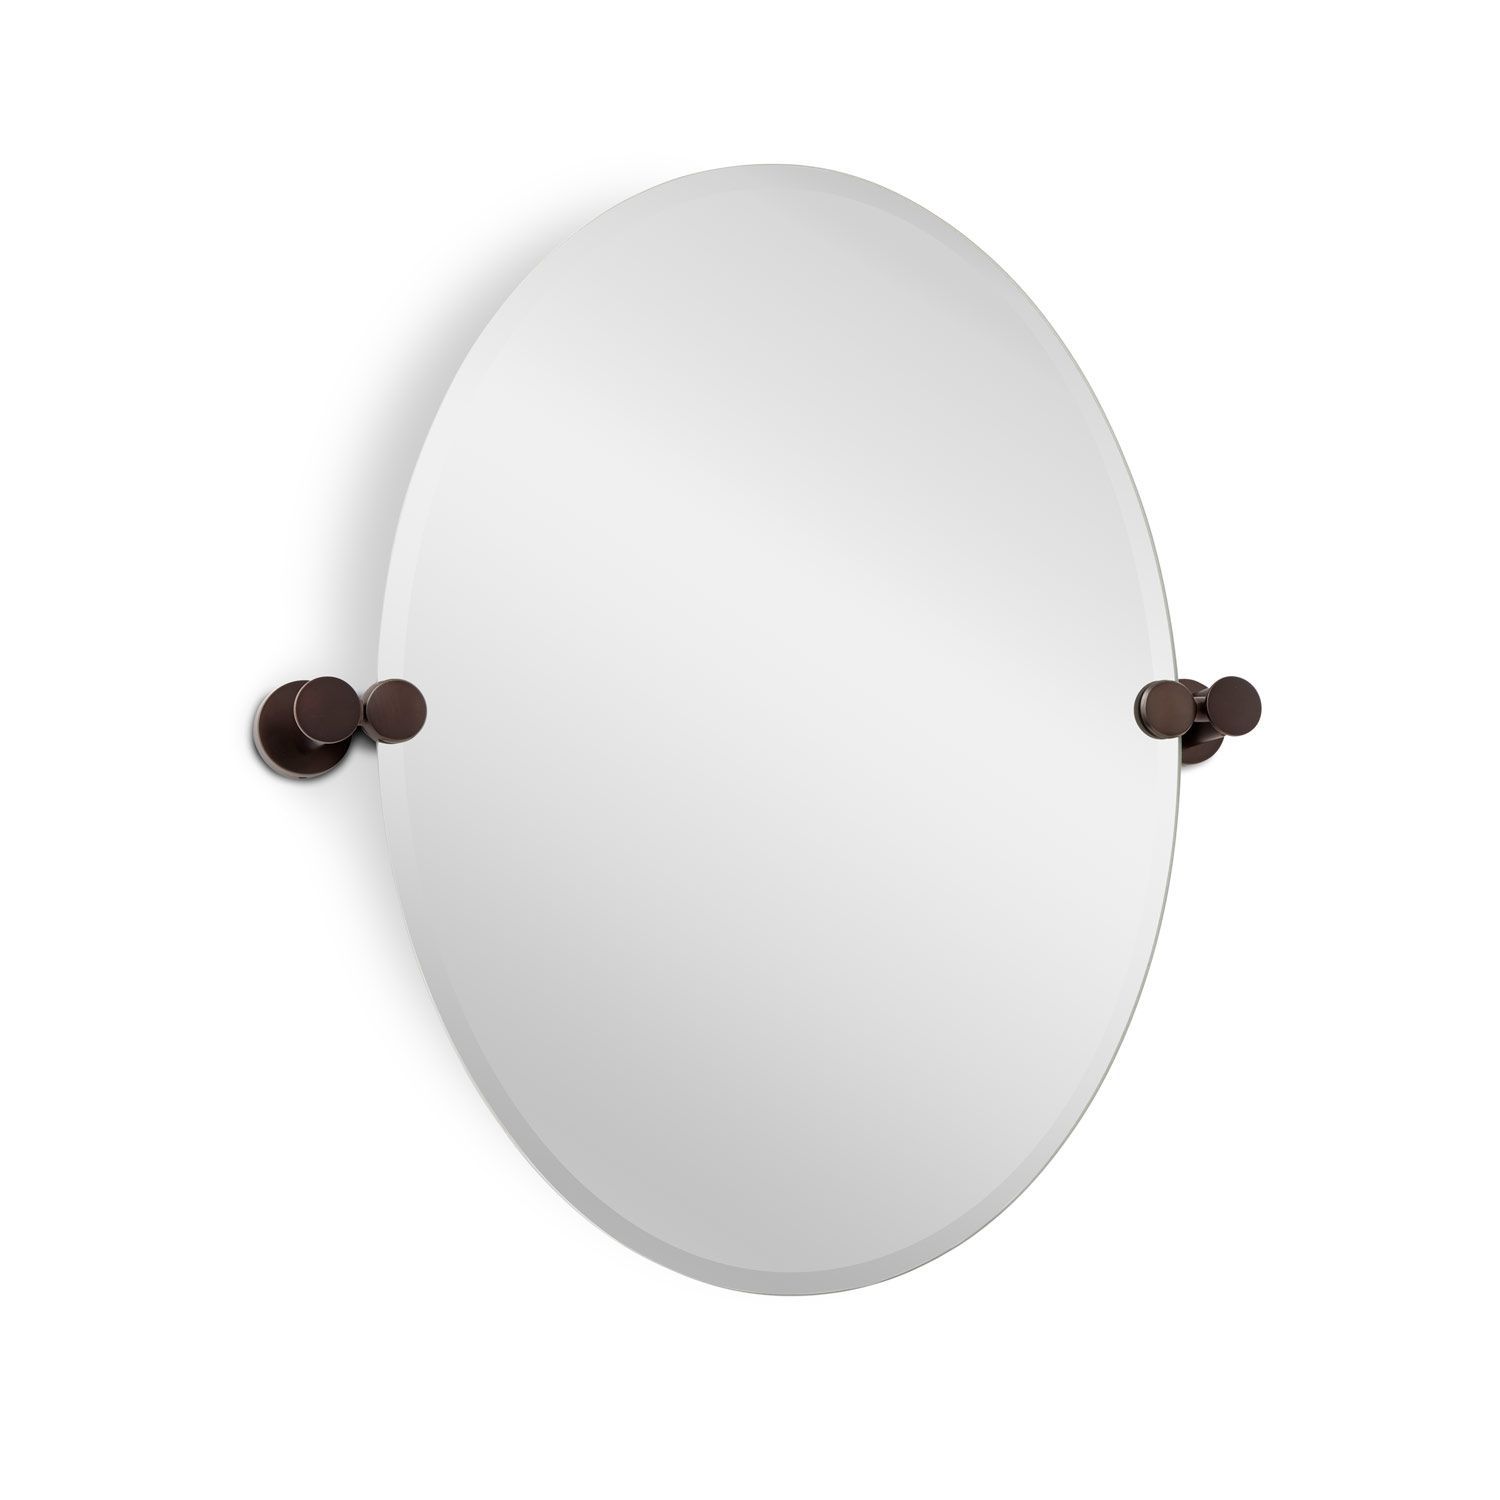 22" Prague Oval Tilting Mirror In Oil Rubbed Bronze | Signature For Ceiling Hung Oiled Bronze Oval Mirrors (View 6 of 15)